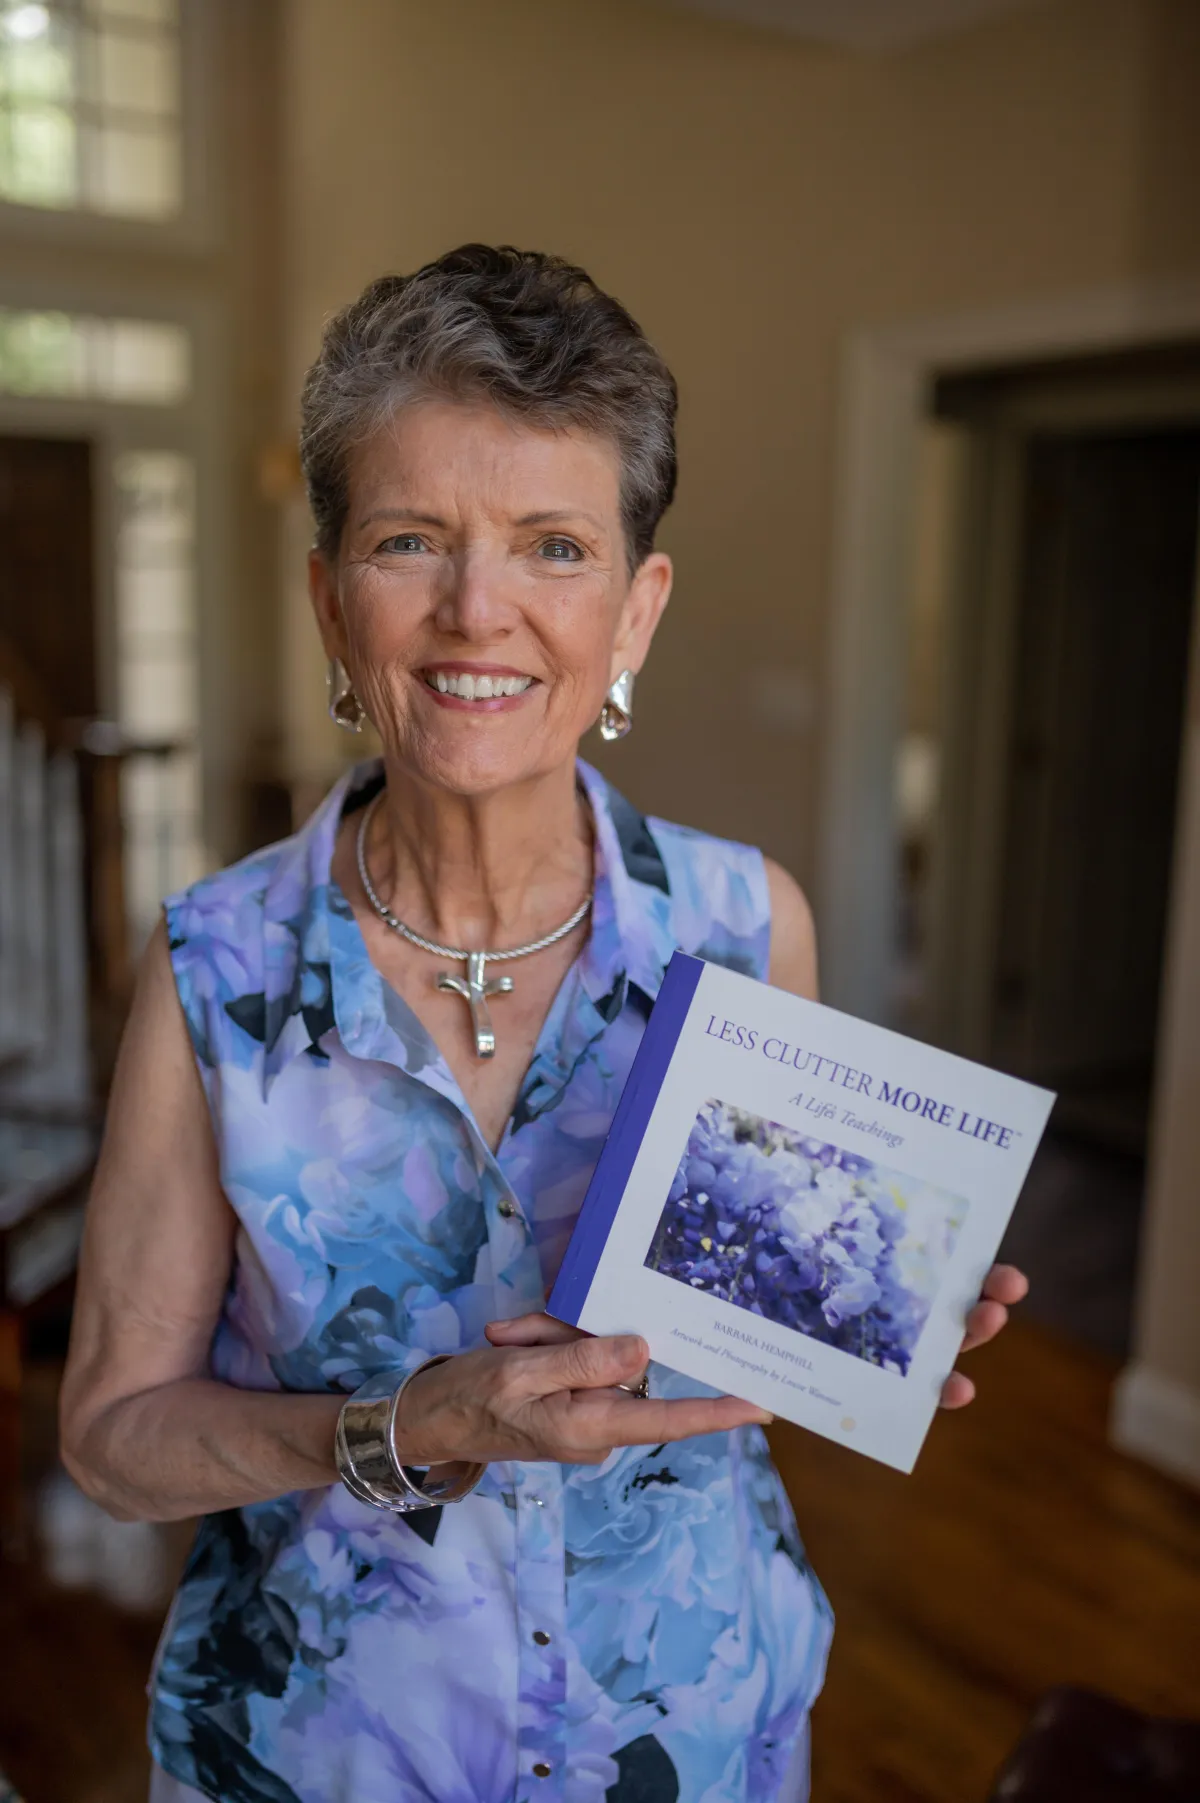 Barbara Hemphill holding her published book titled “Less clutter more life”